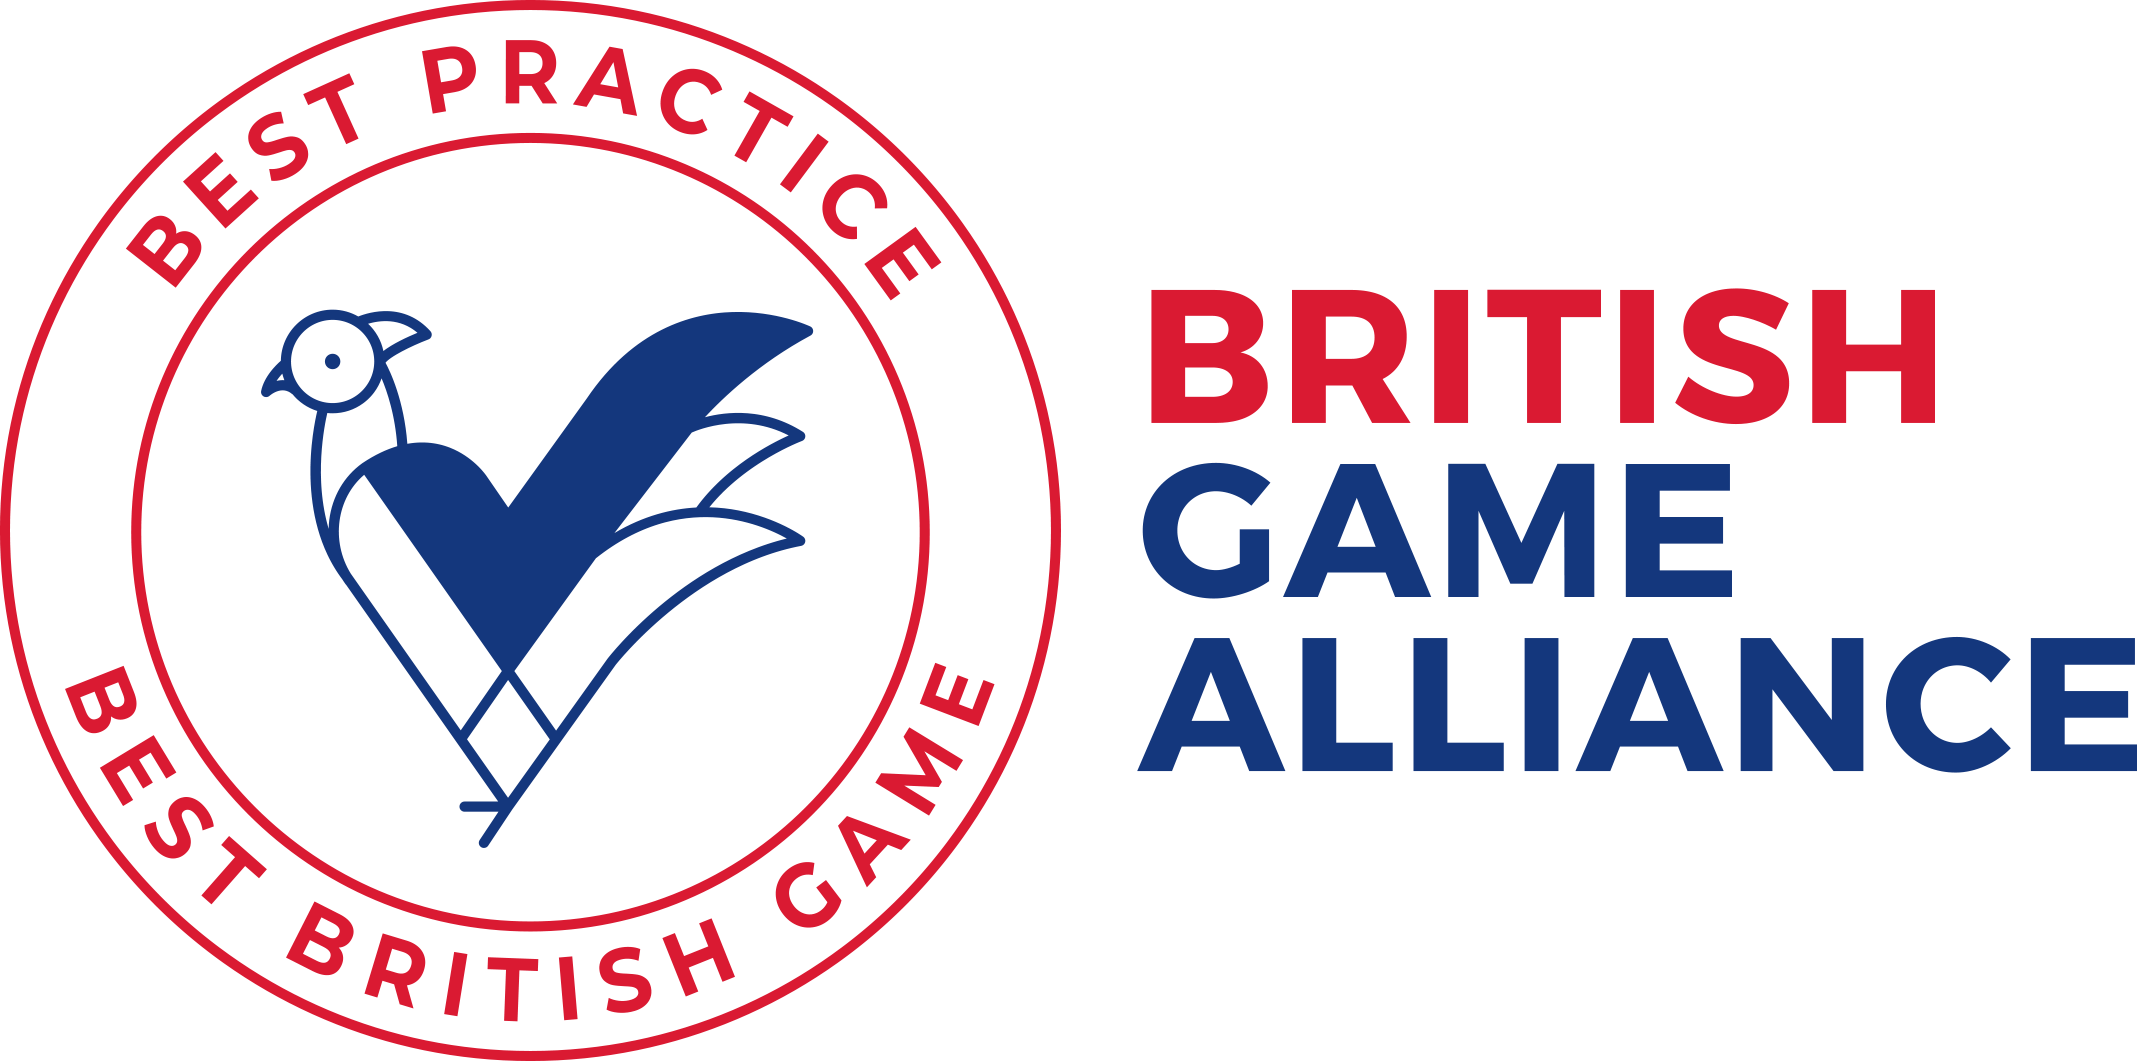 British games. Keepers Alliance.